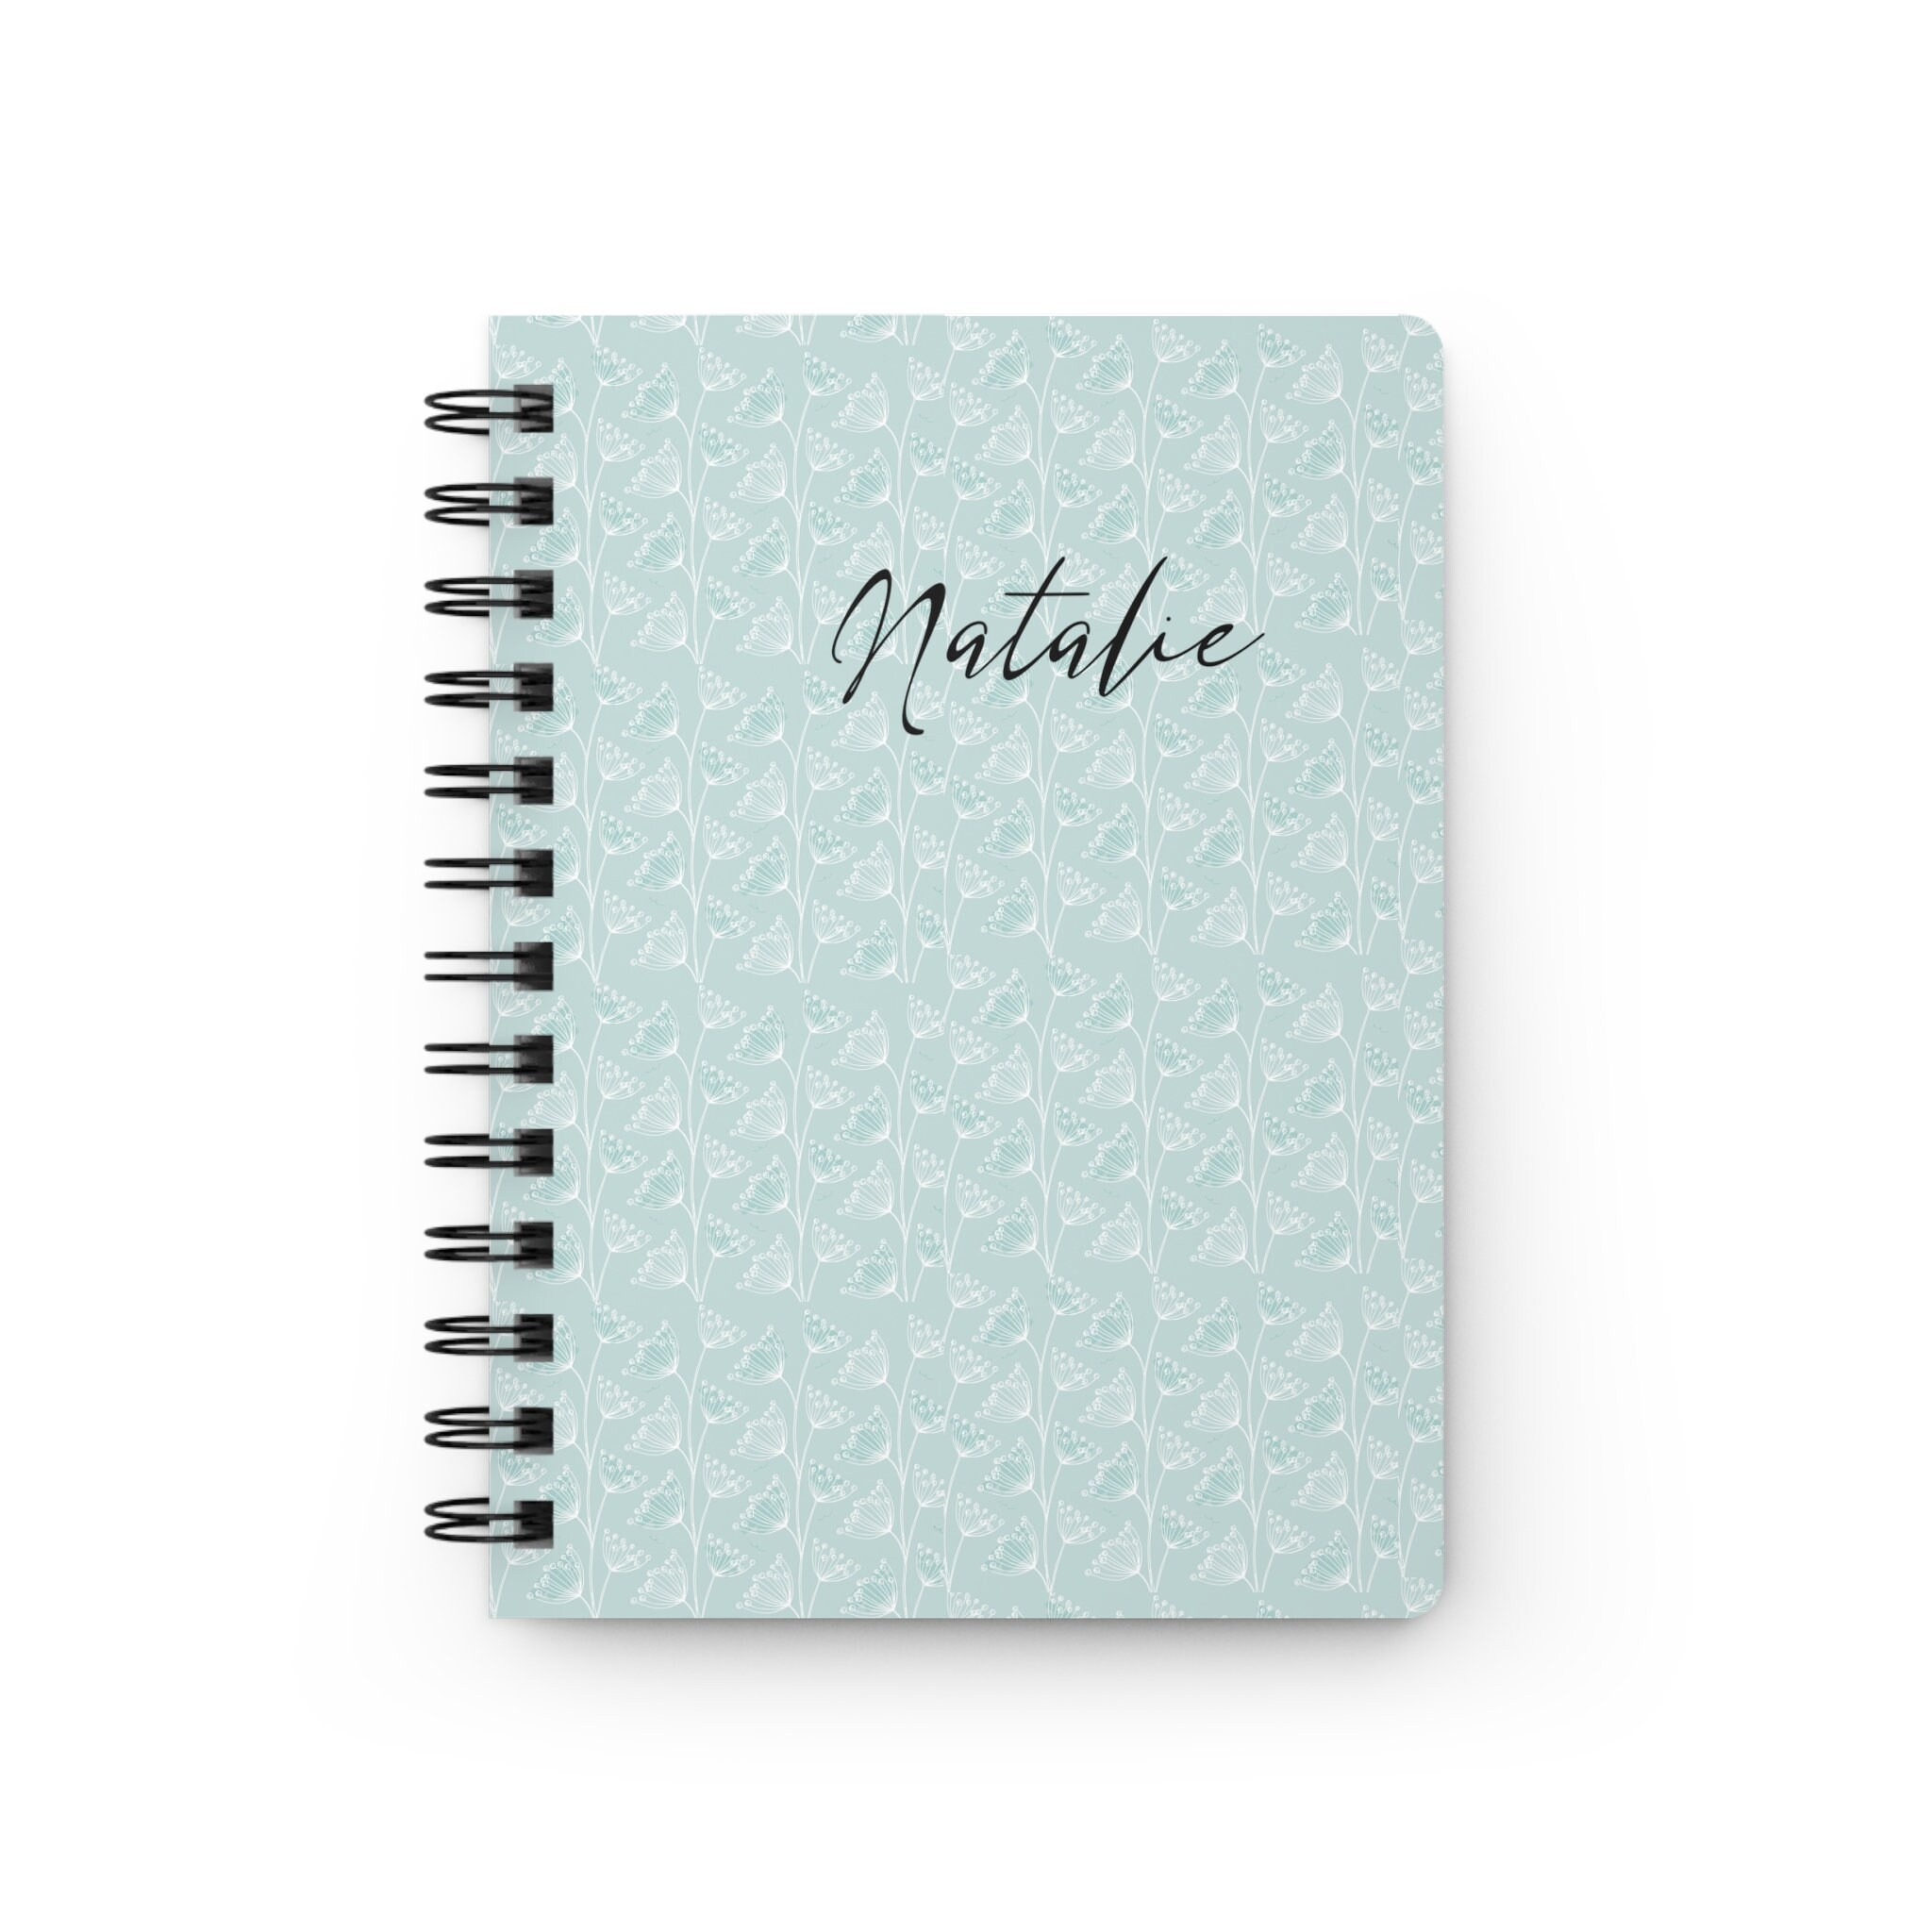 Japanese Notebook, Anime Notebook, Spiral Bound Journal, Aesthetic